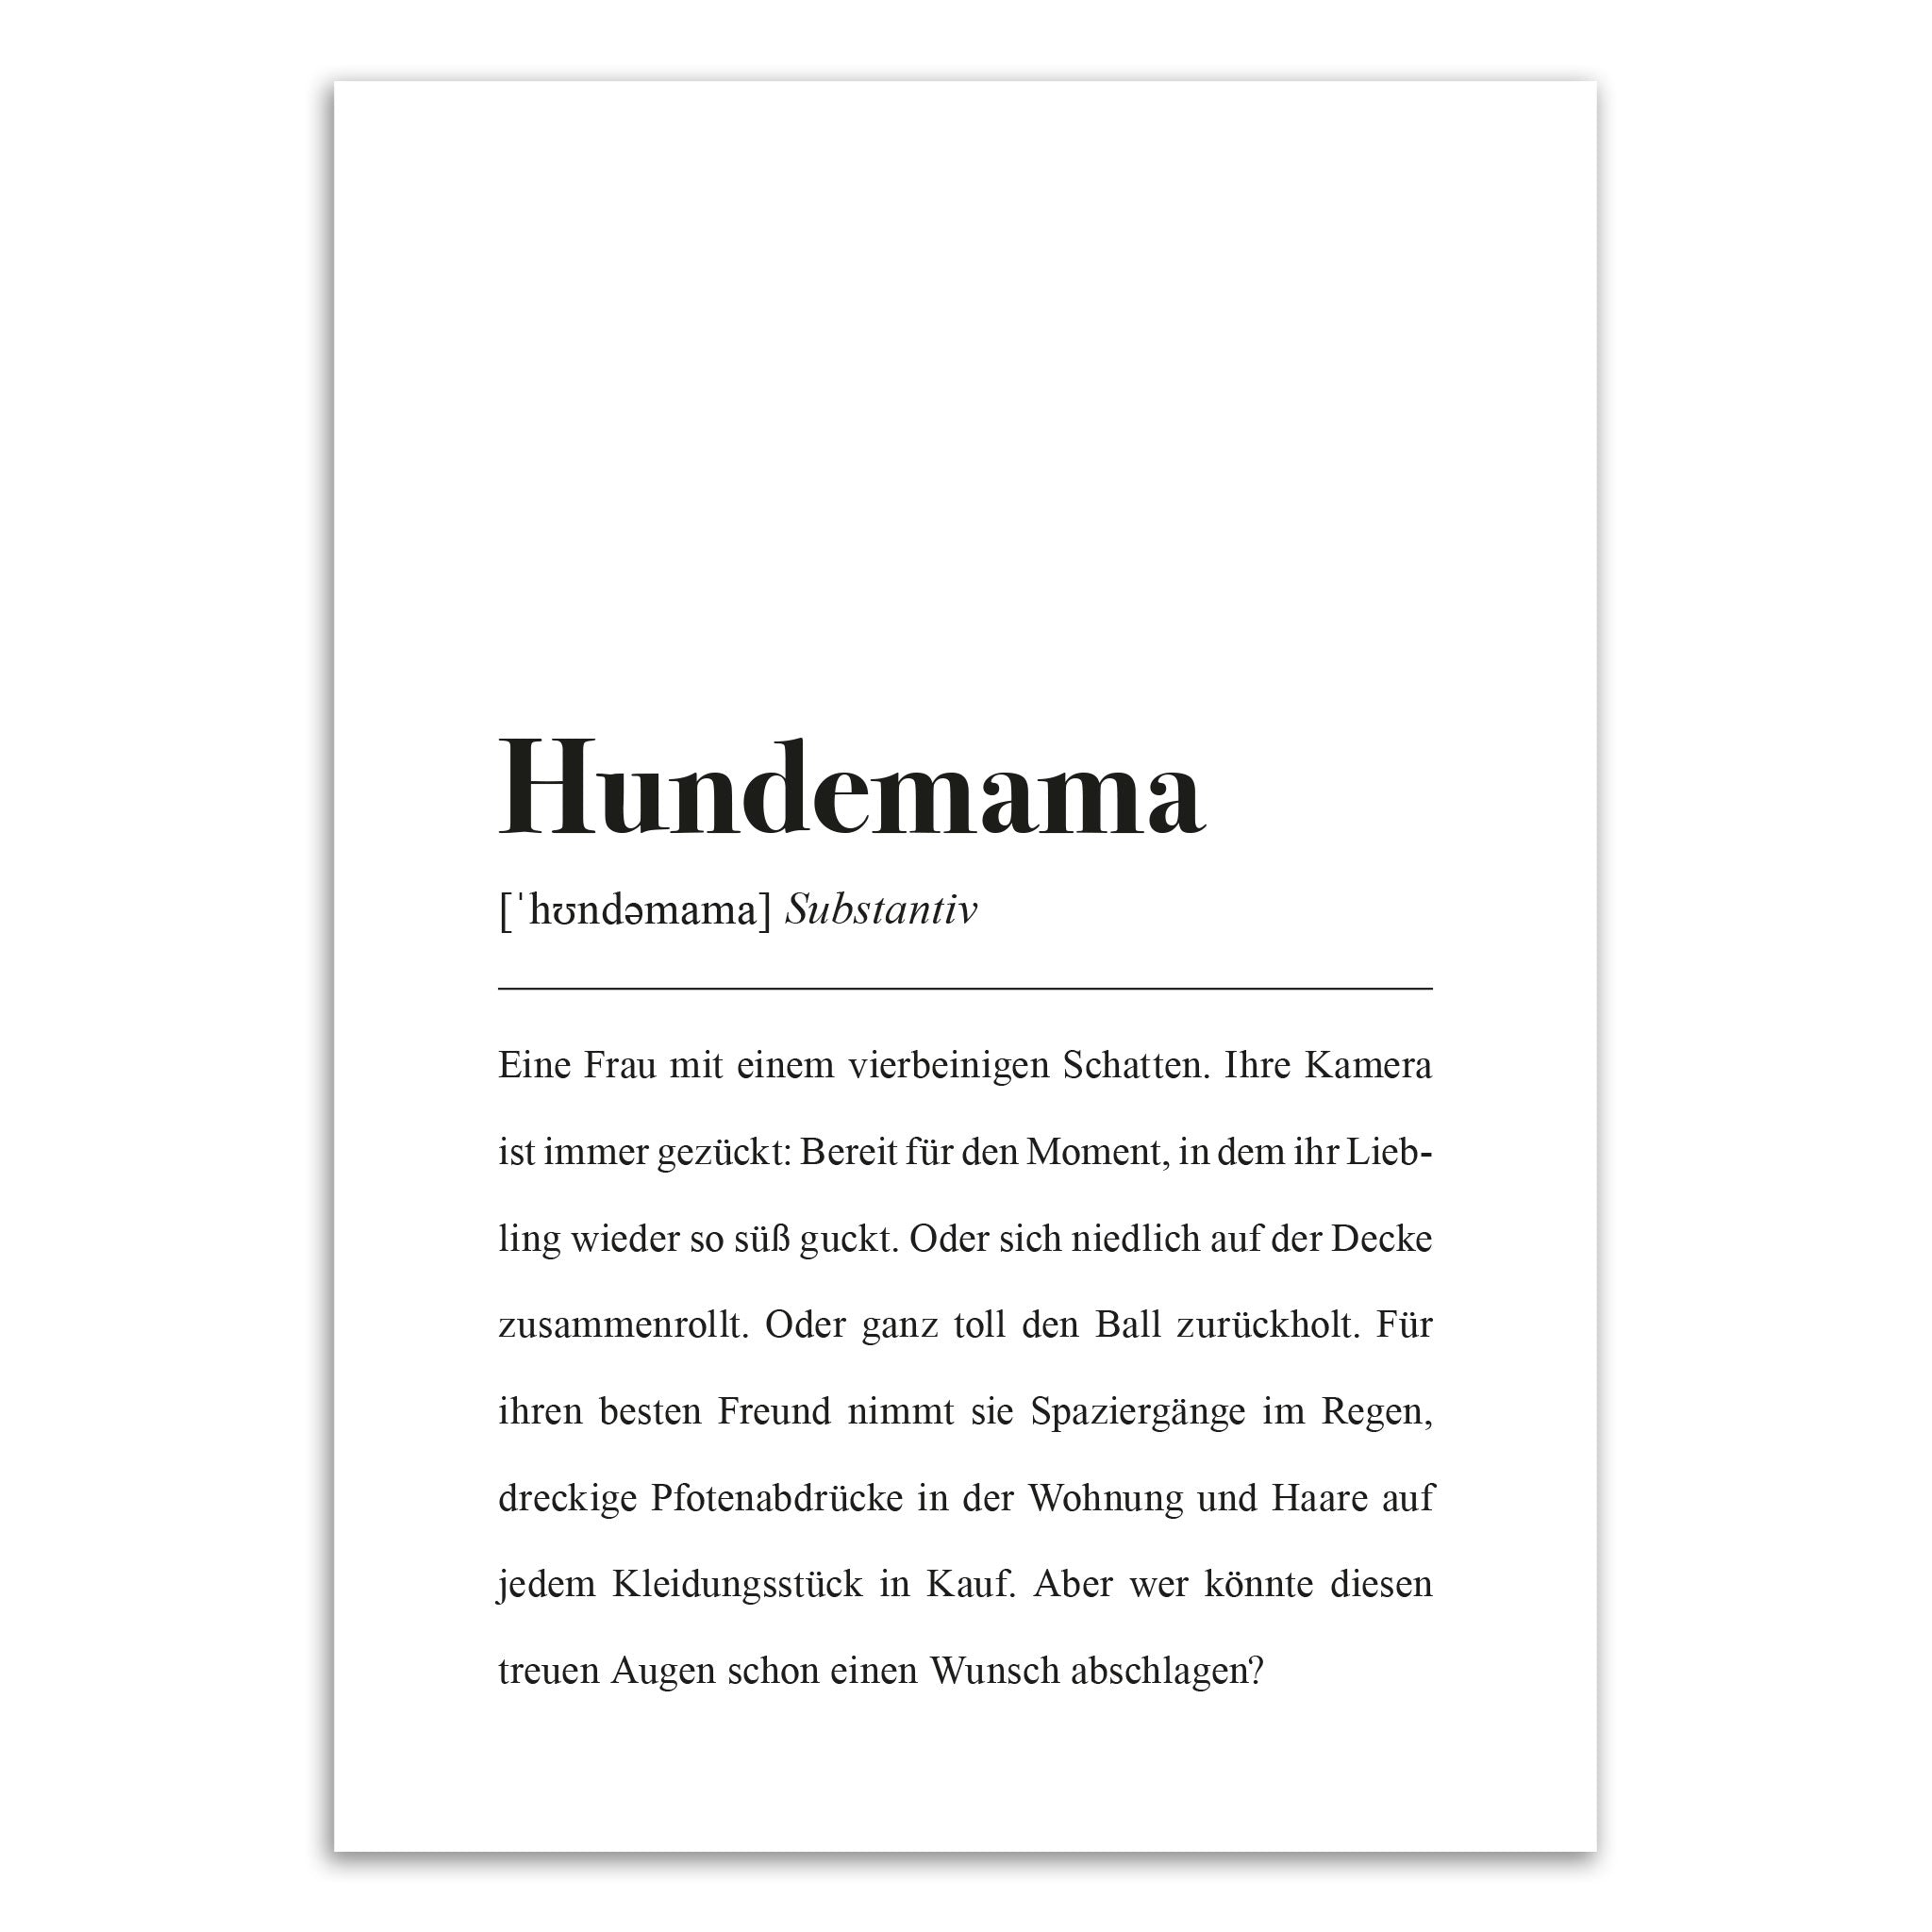 Hundemama Definition: DIN A4 Poster